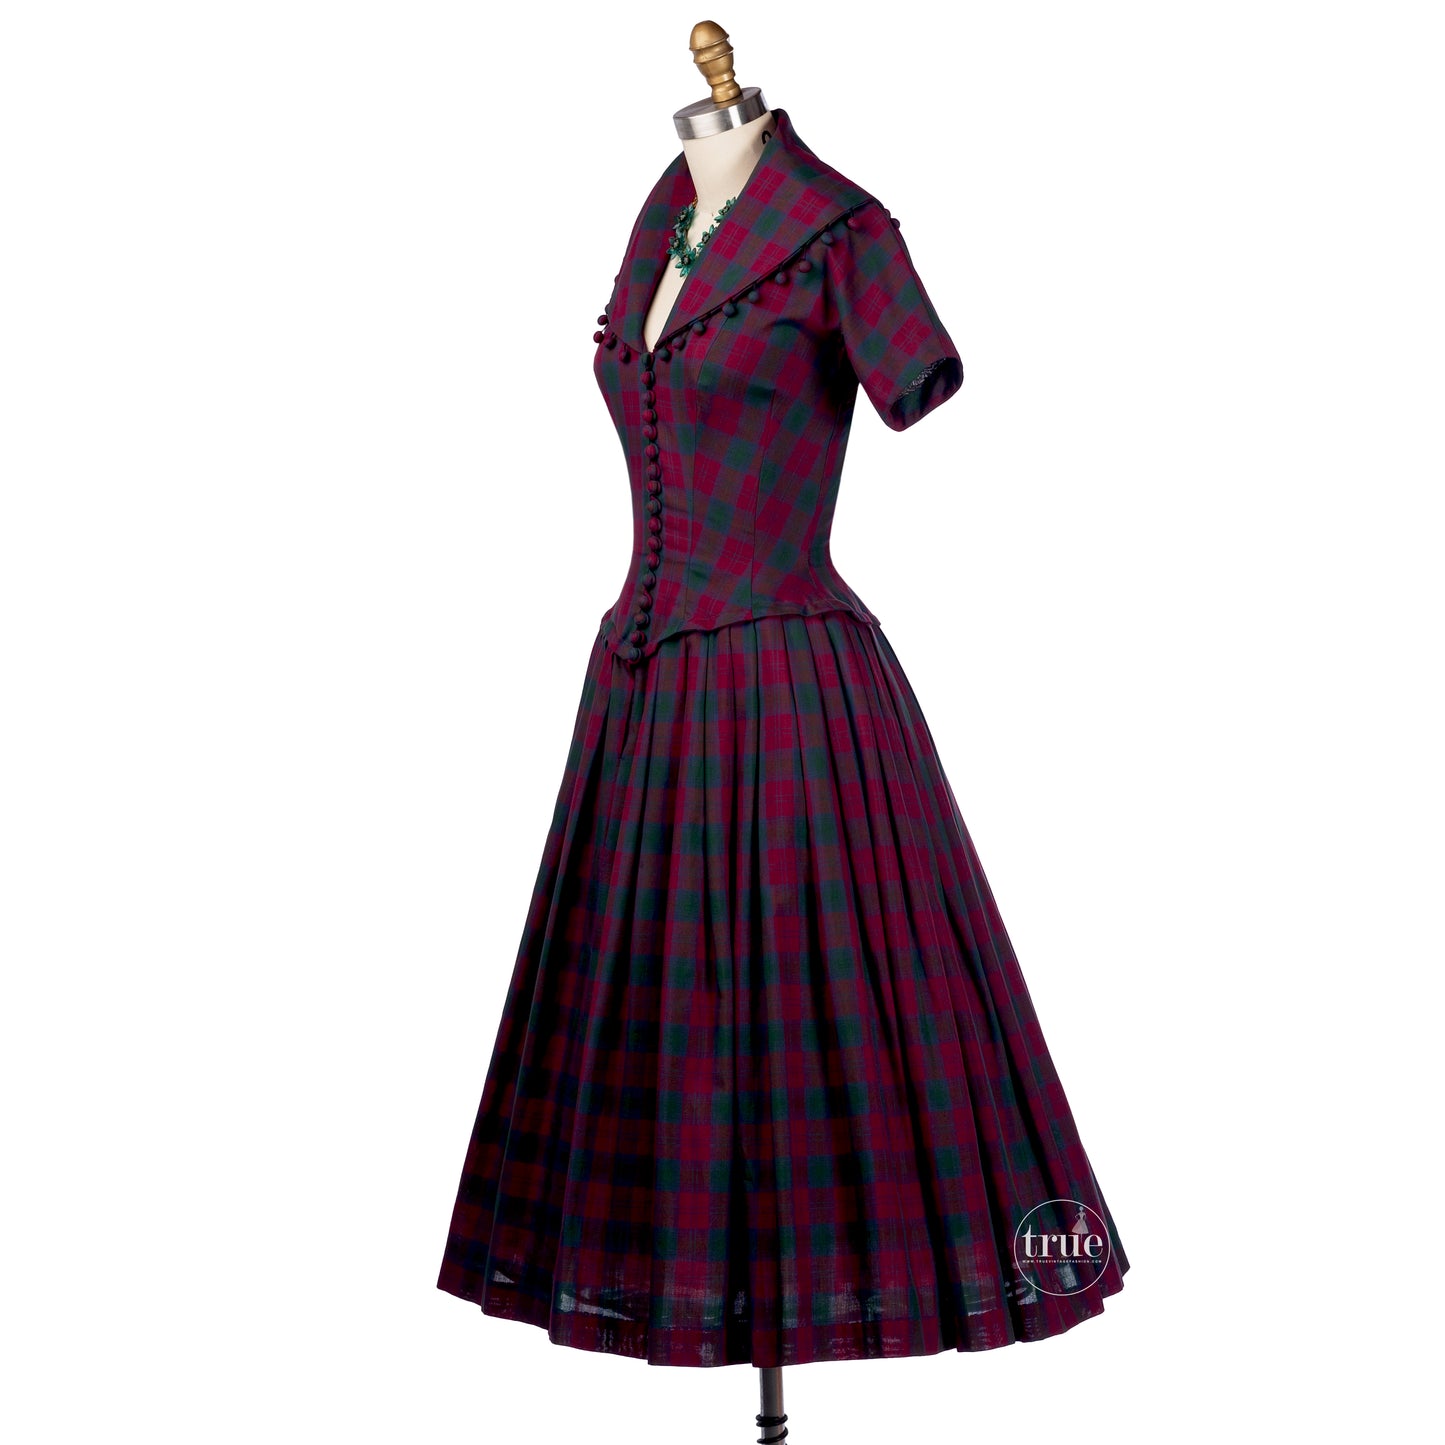 vintage 1950's dress ...Suzy Perette new look plaid full skirt dress with ball fringe